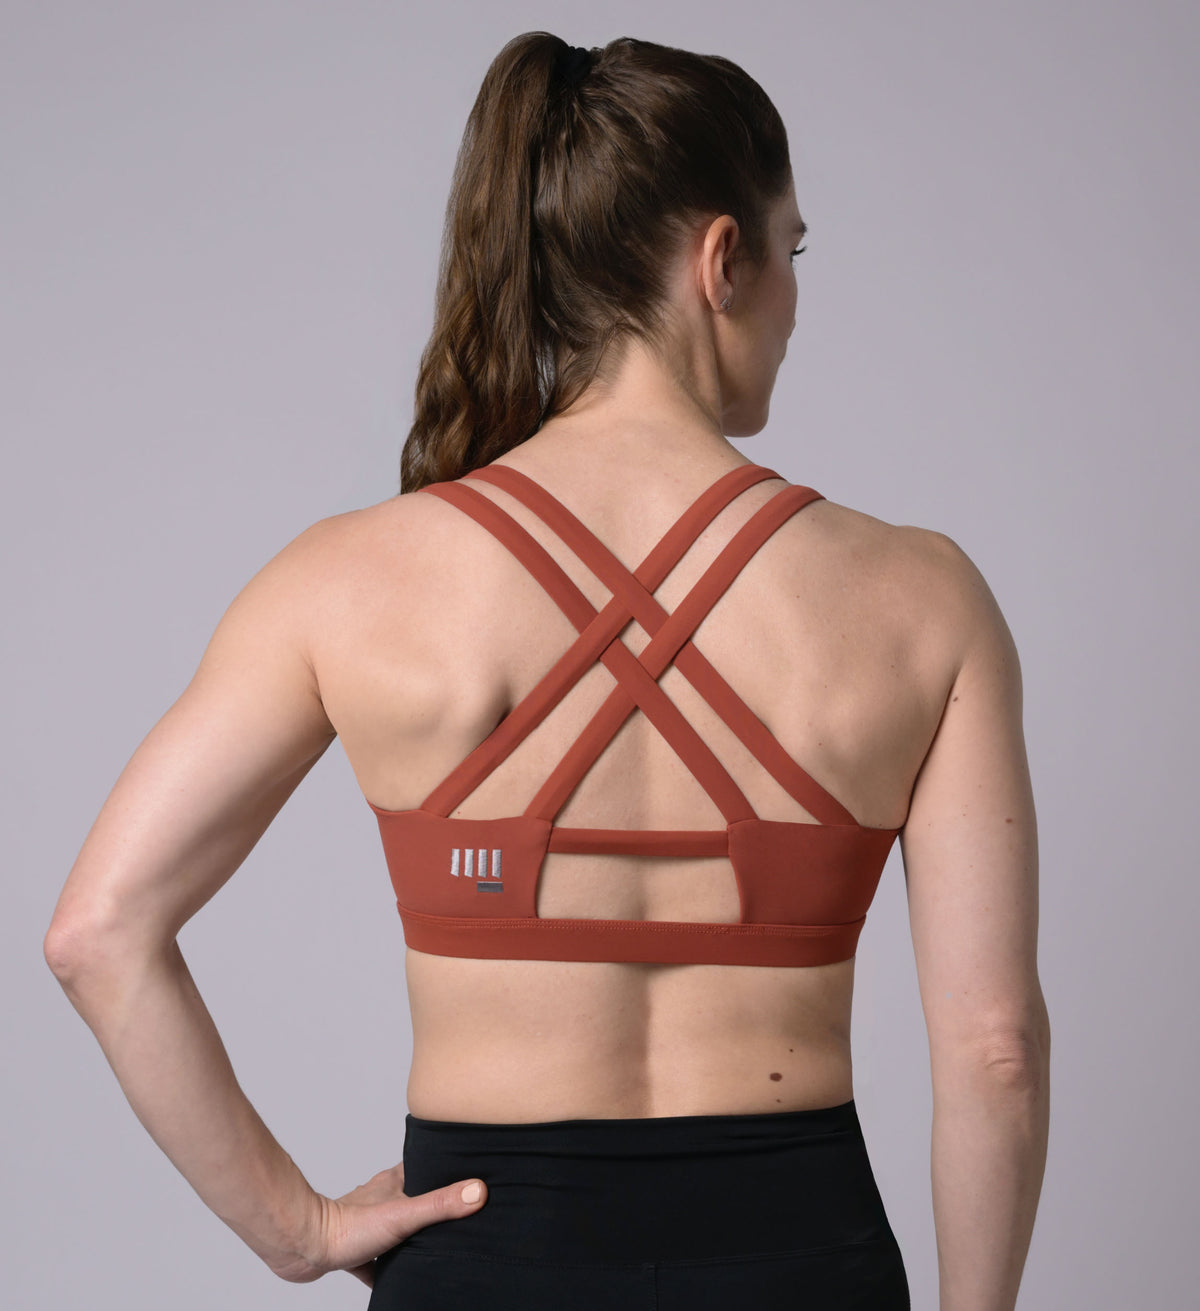 But really—grab the Icebreaker Women's Meld Zone Sport Bra and tackle that  bouldering problem you've been eyeing at th…